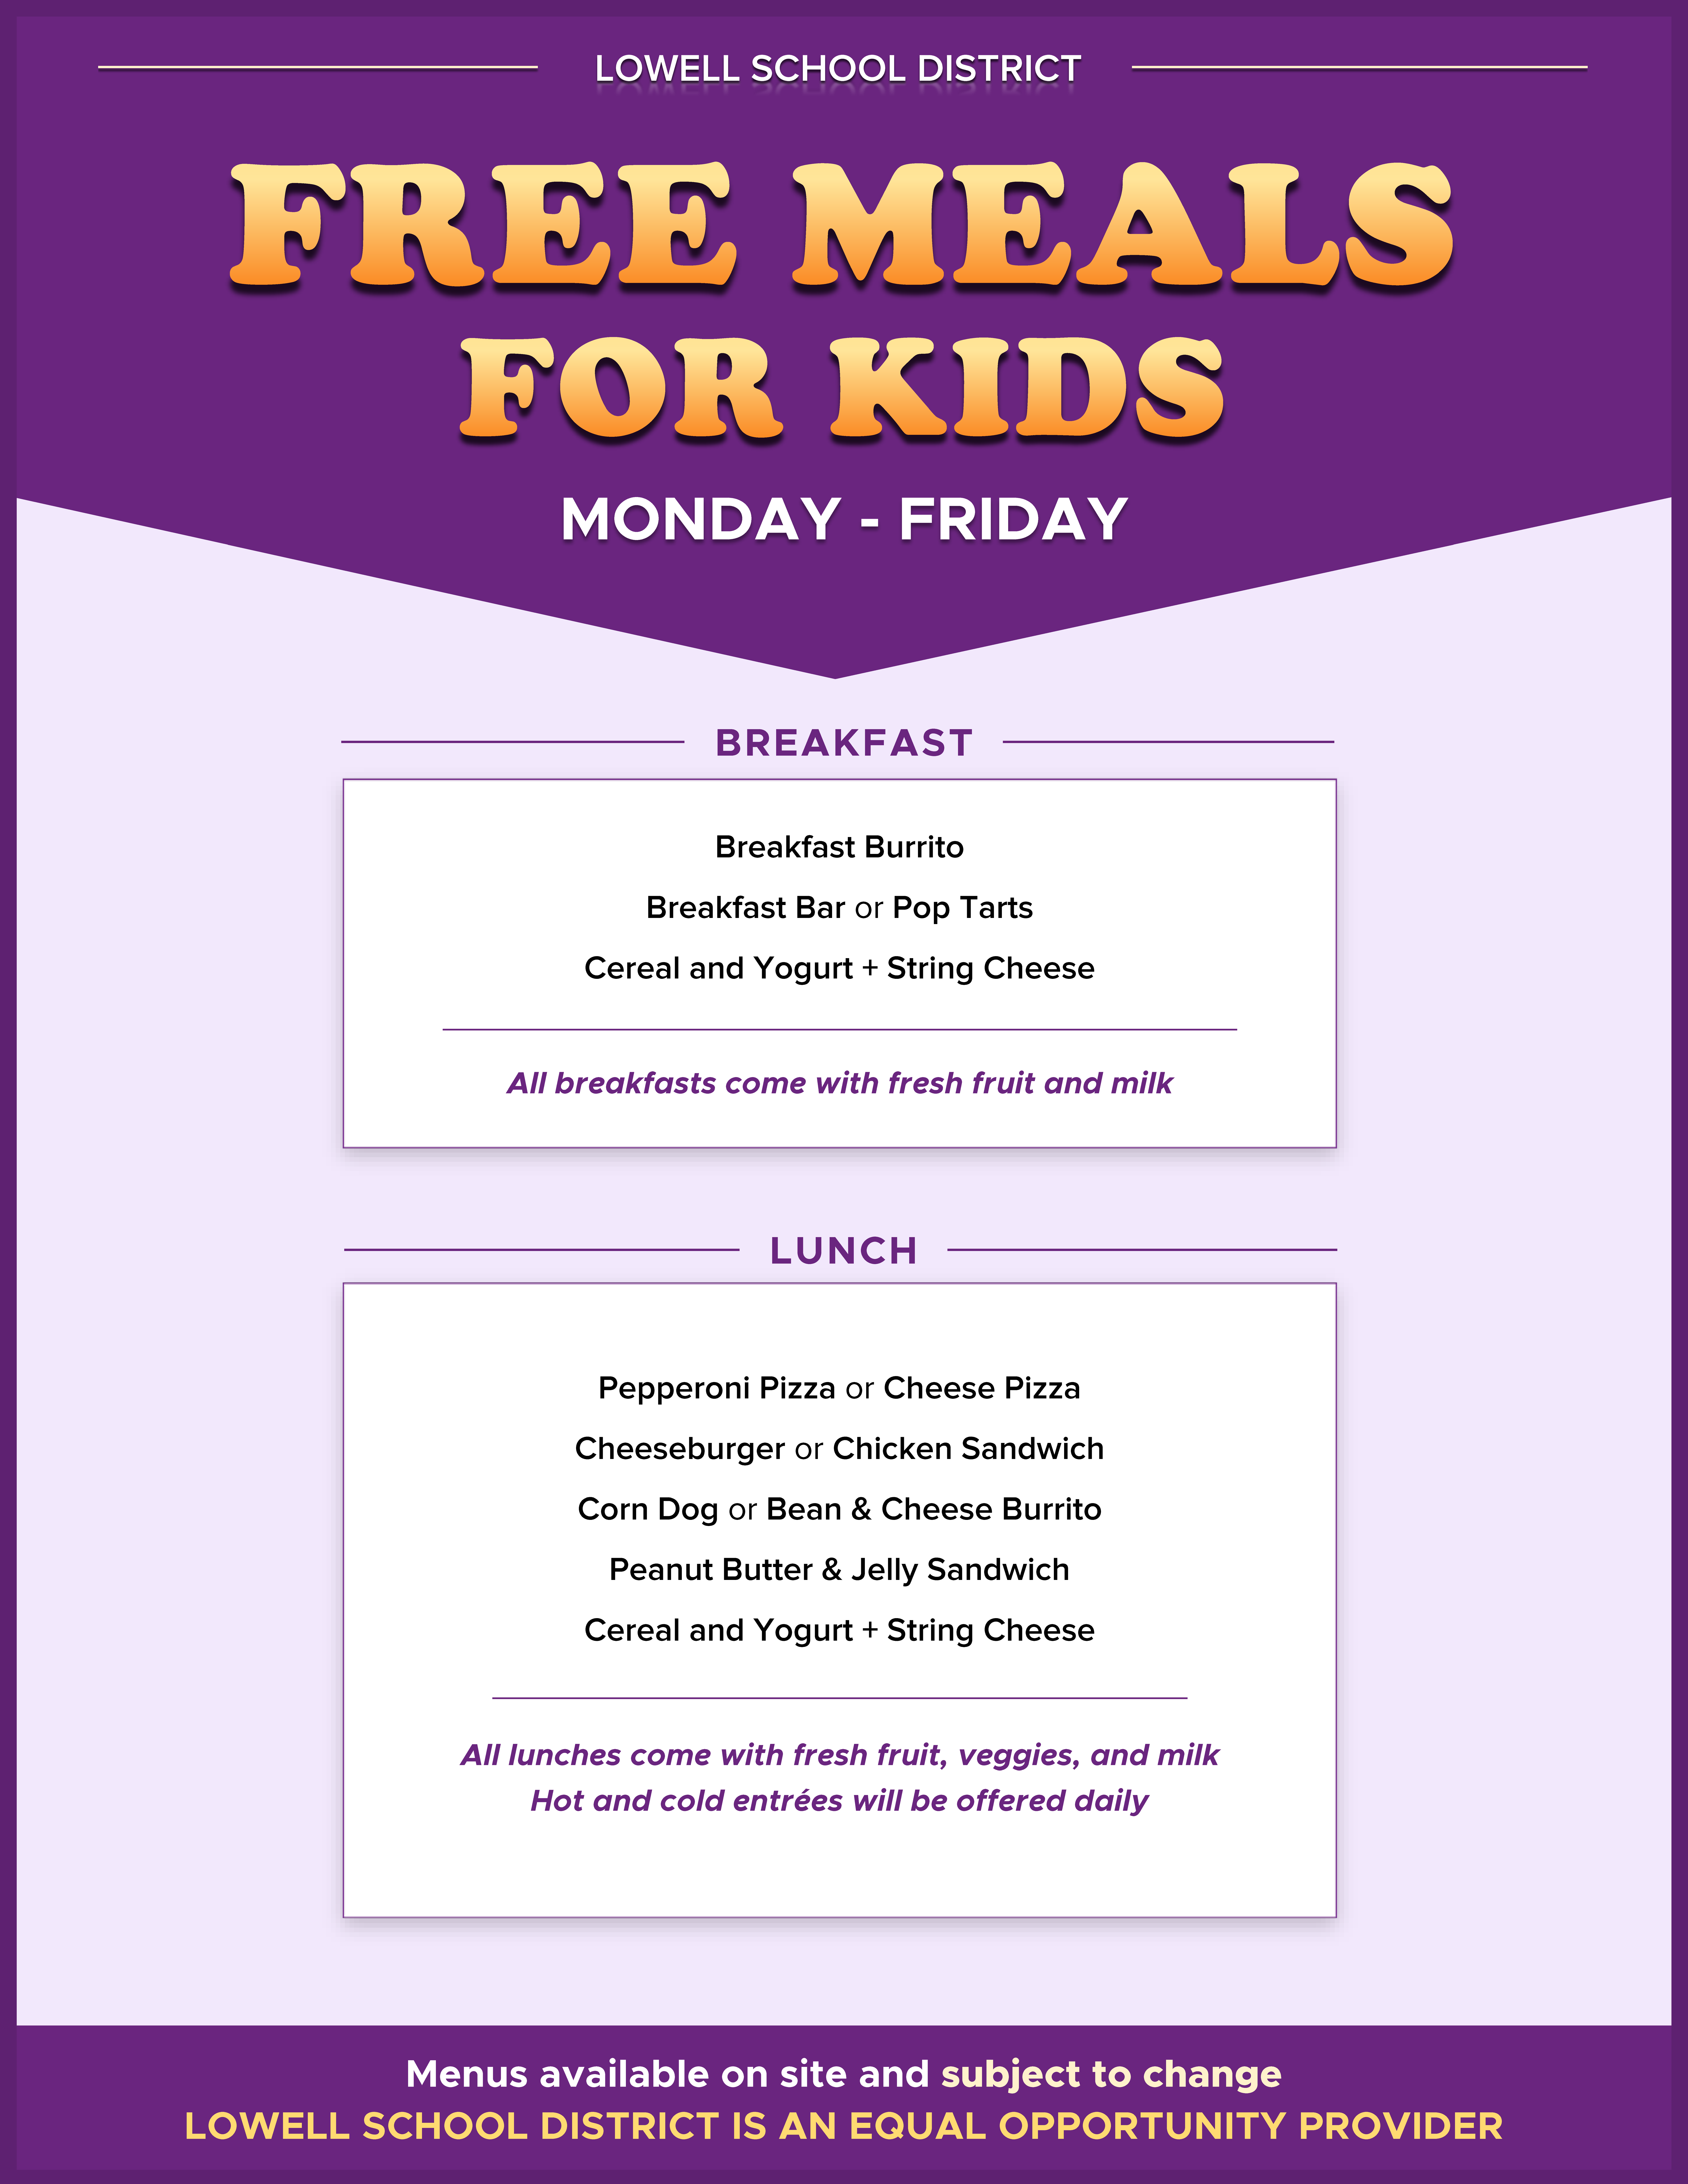 Lowell SD Seamless Summer Meals Flyer 2023 (Updated Breakfast Time)_Page_2